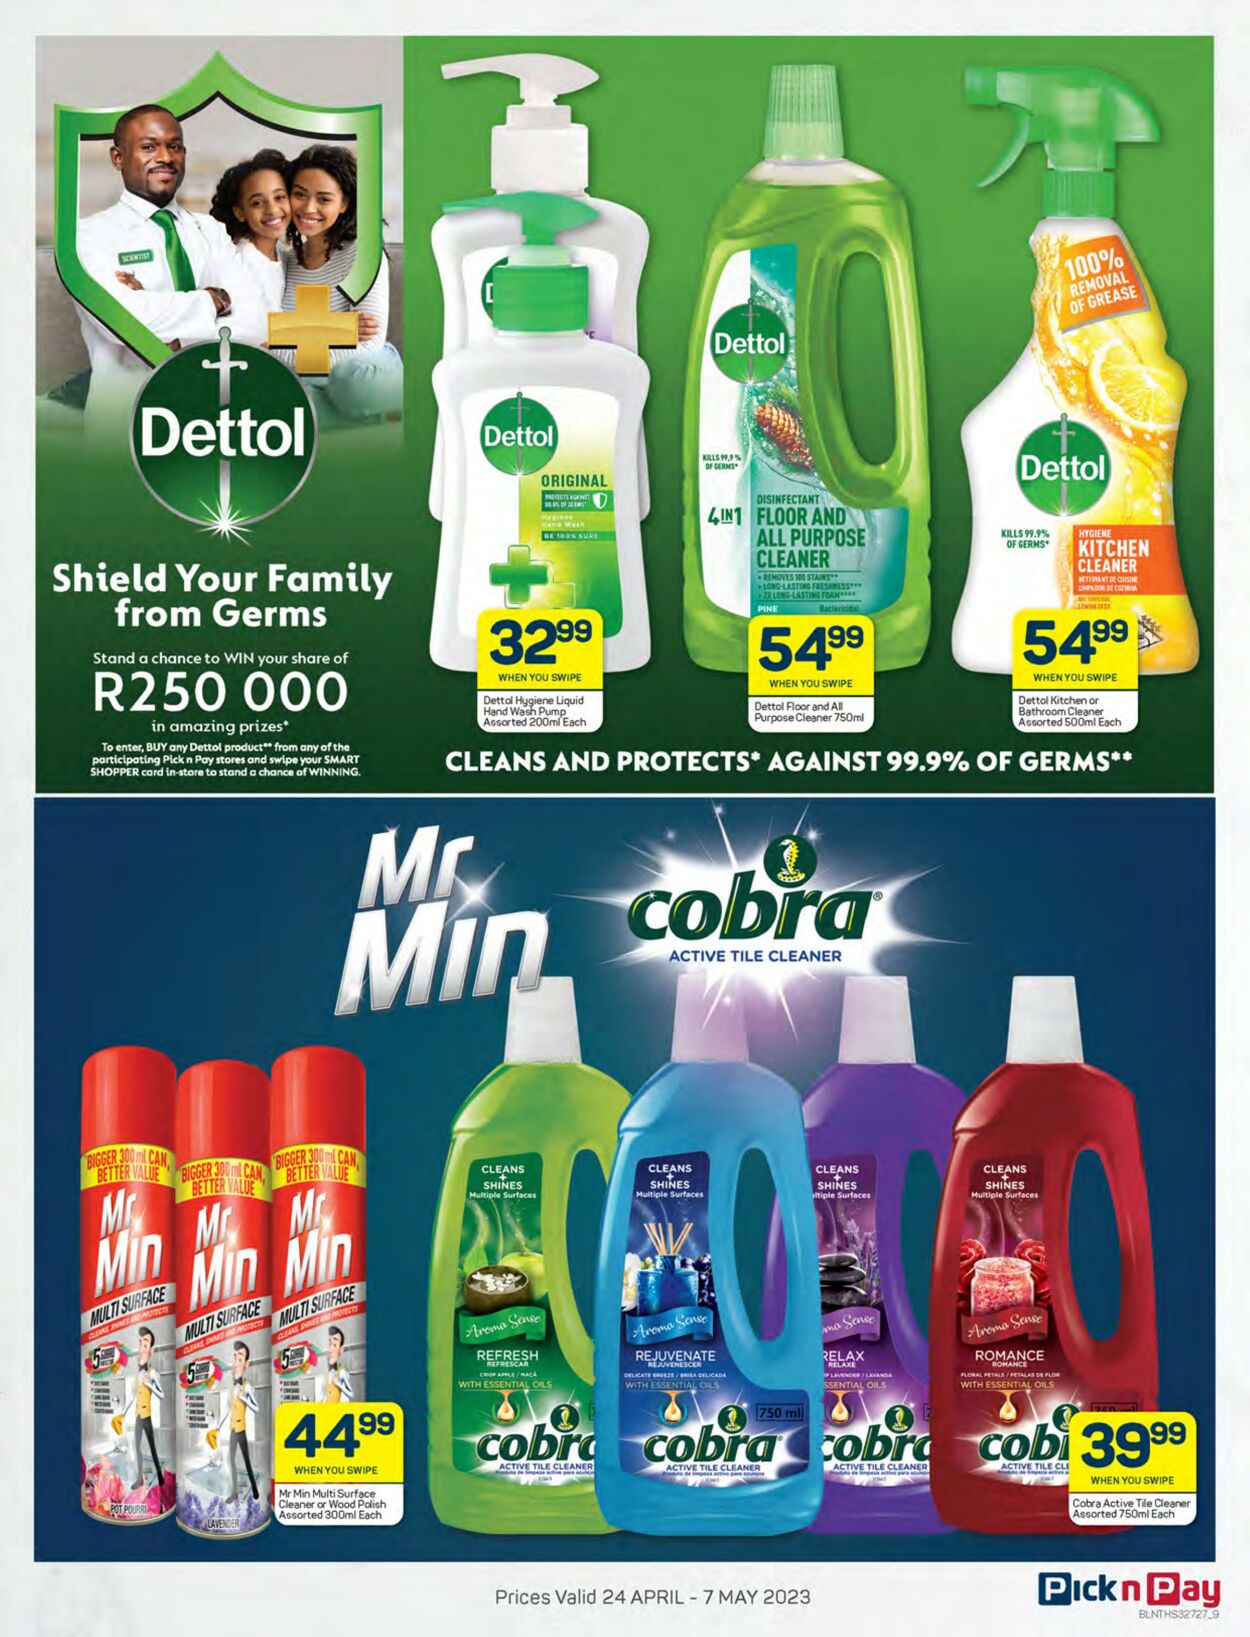 Special Pick n Pay 24.04.2023 - 07.05.2023